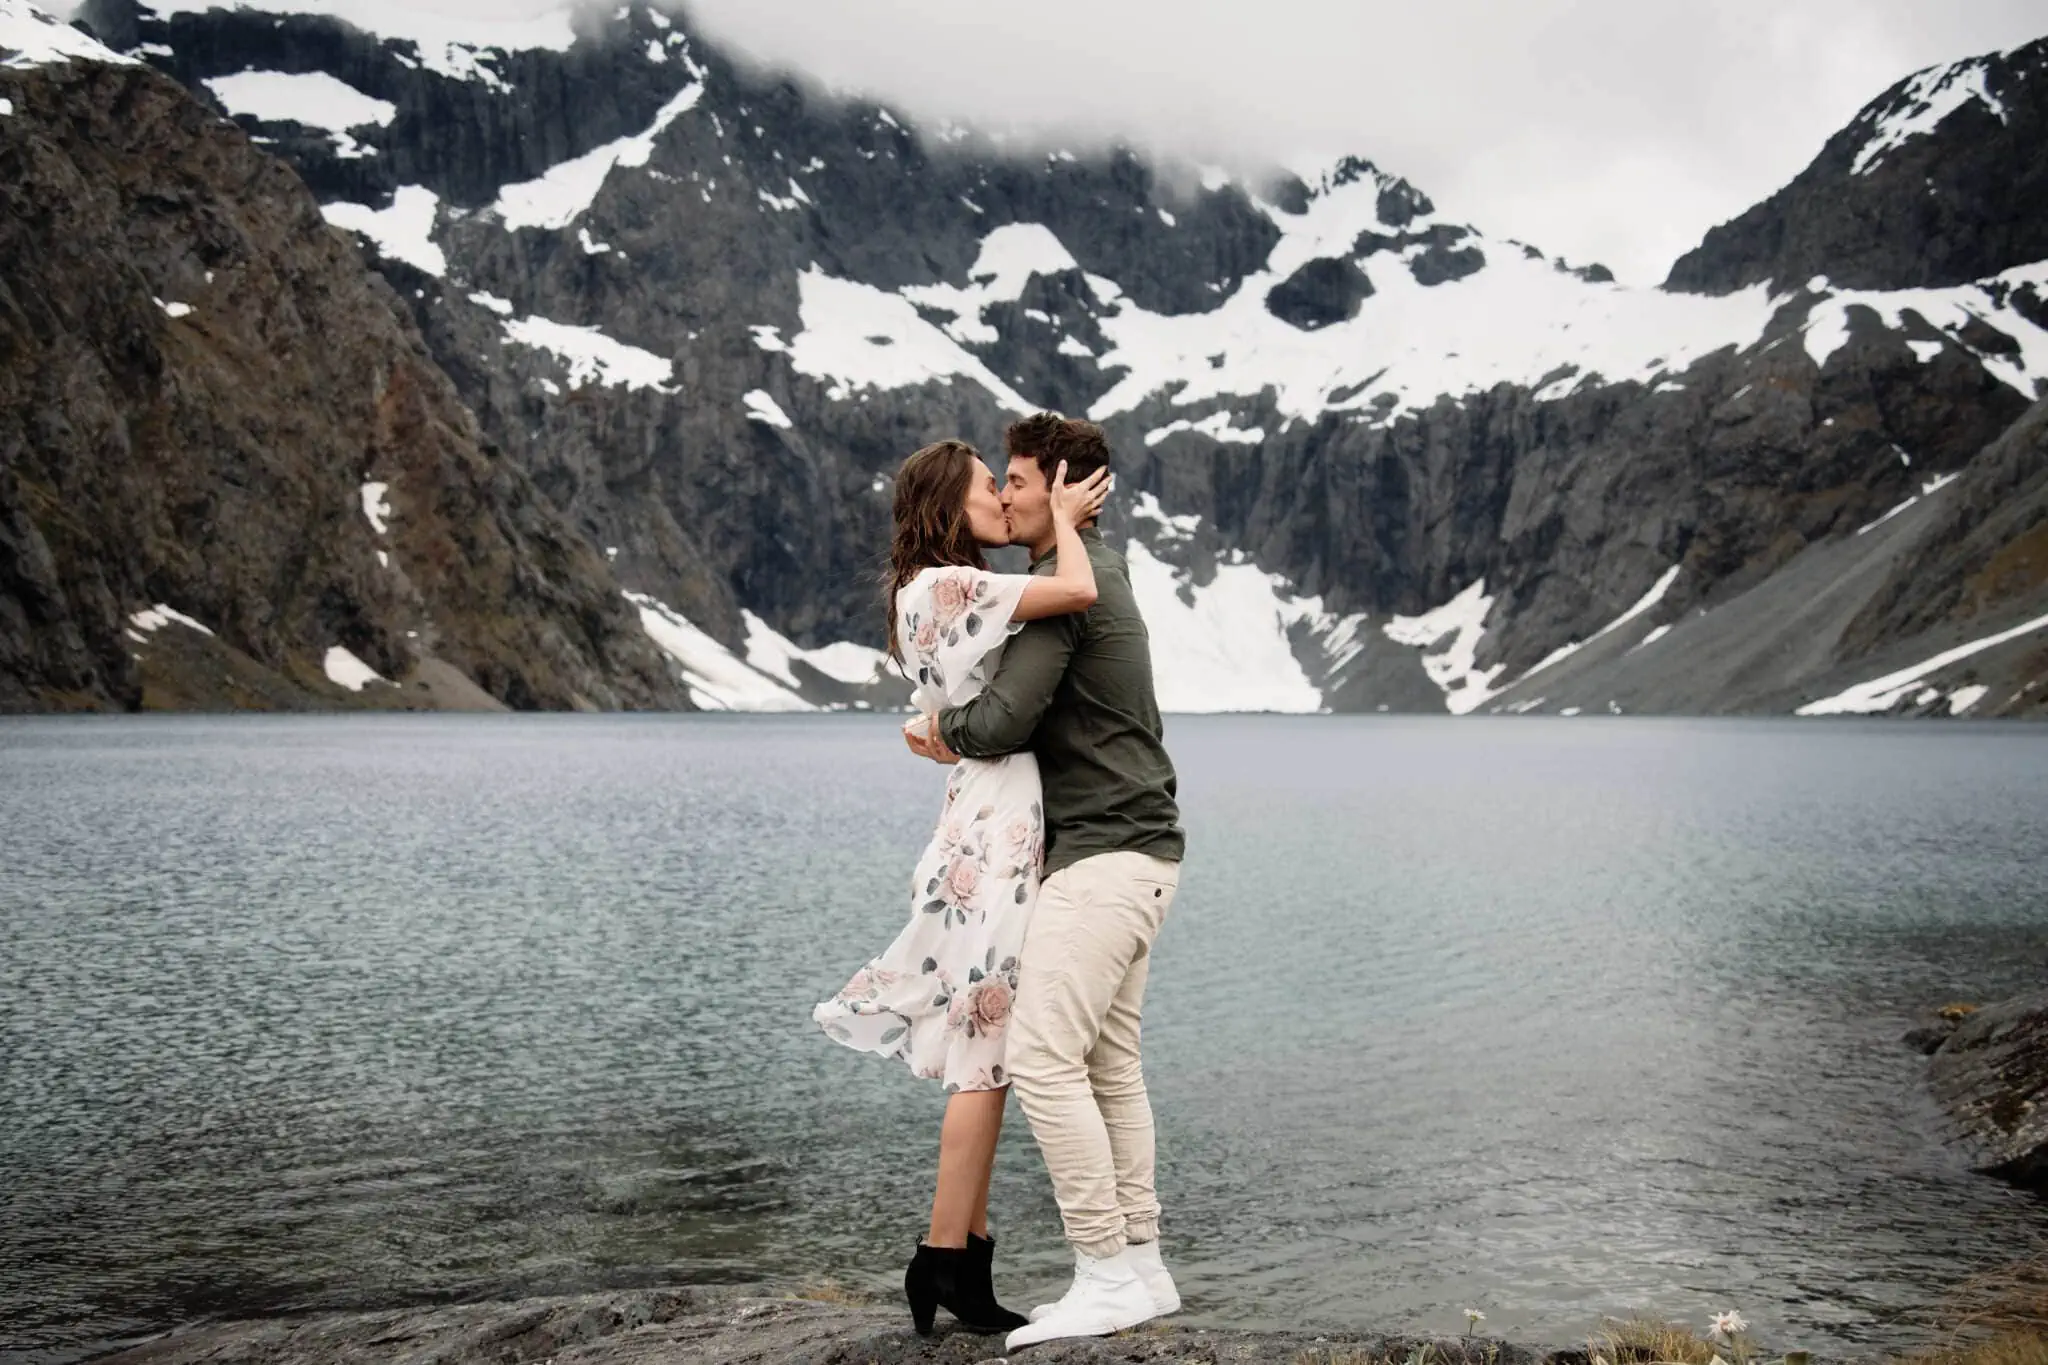 Scott and Hayley embracing in front of a mountain lake.